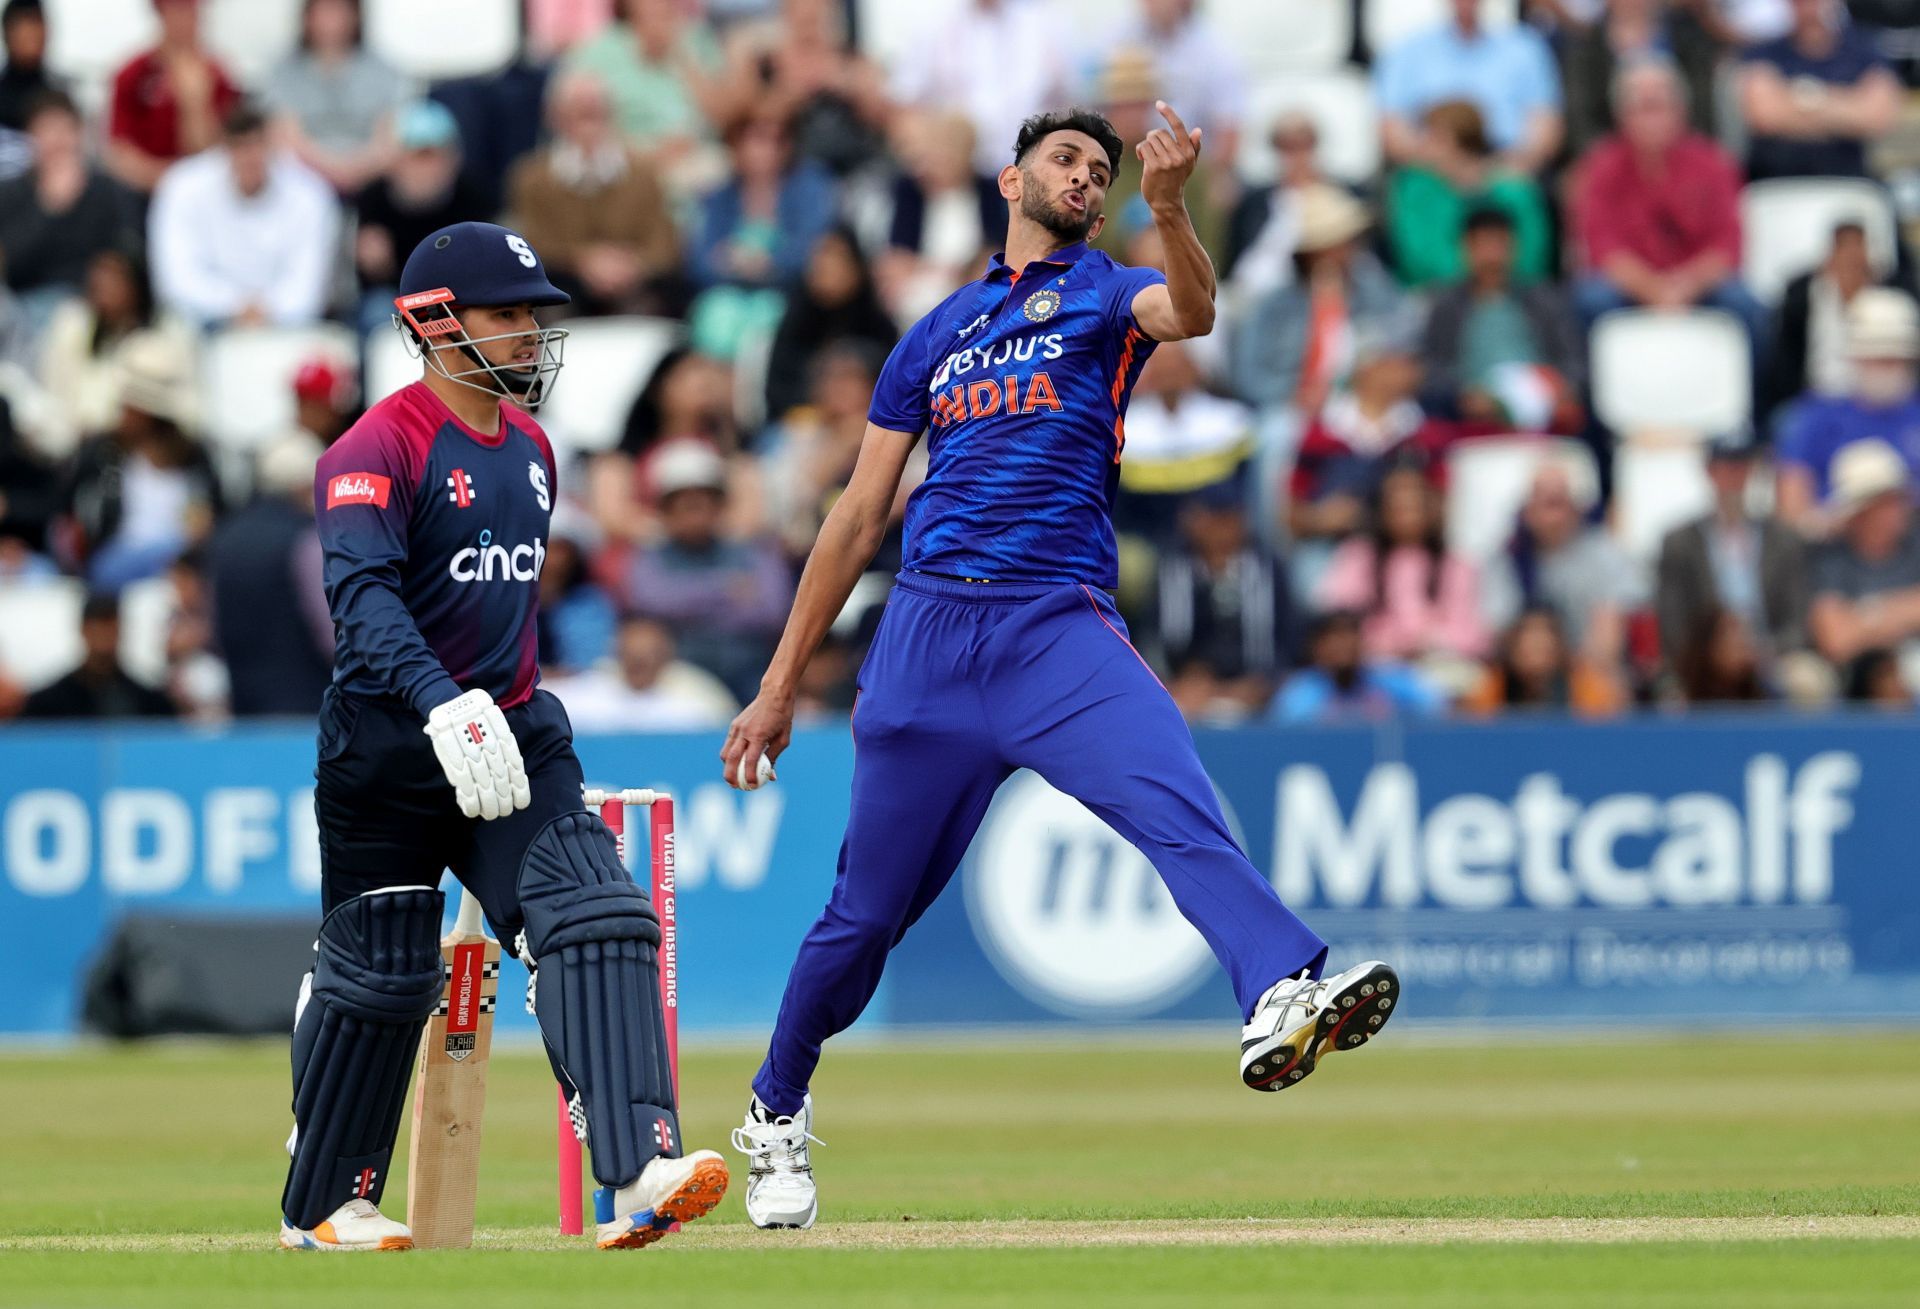 Prasidh Krishna was quite expensive in the second ODI against England